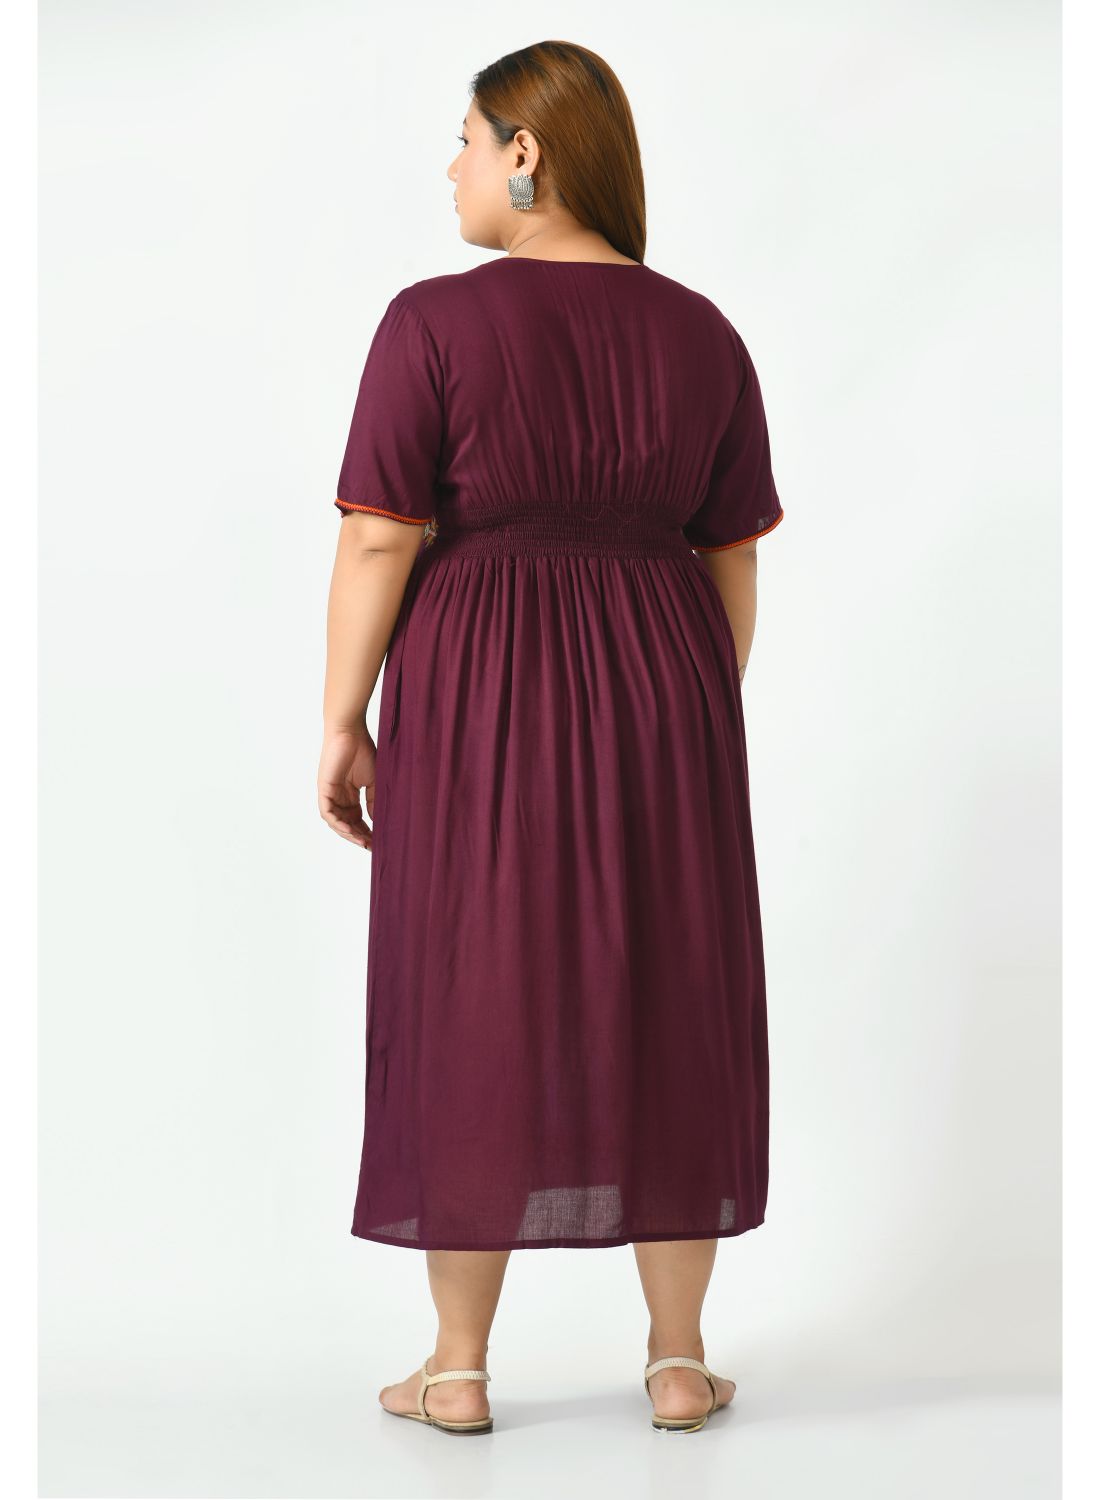 Brown Ethnic Motifs Embroidered A-Line Midi Dress Plus Size